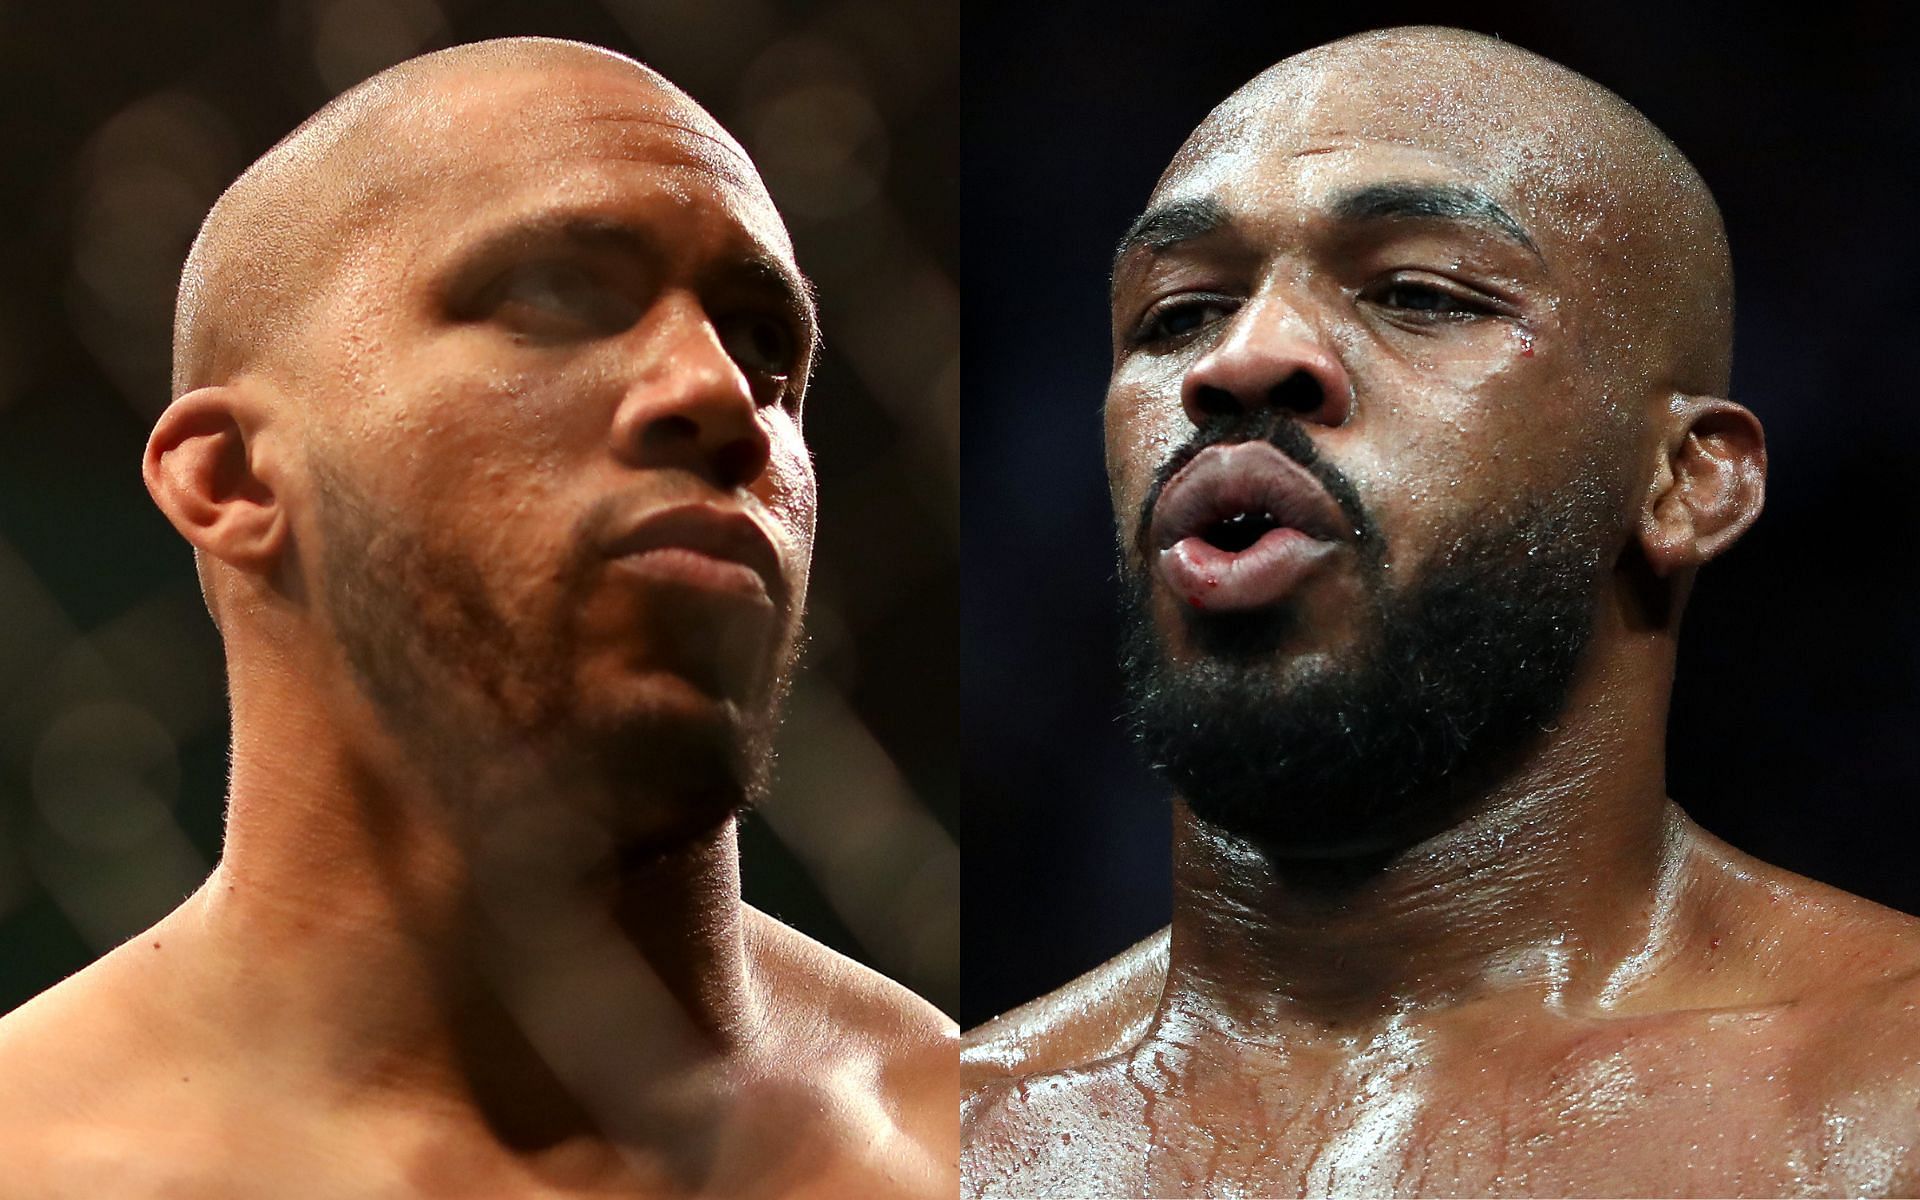 Ciryl Gane (left) and Jon Jones (right). [Images courtesy: Getty Images]